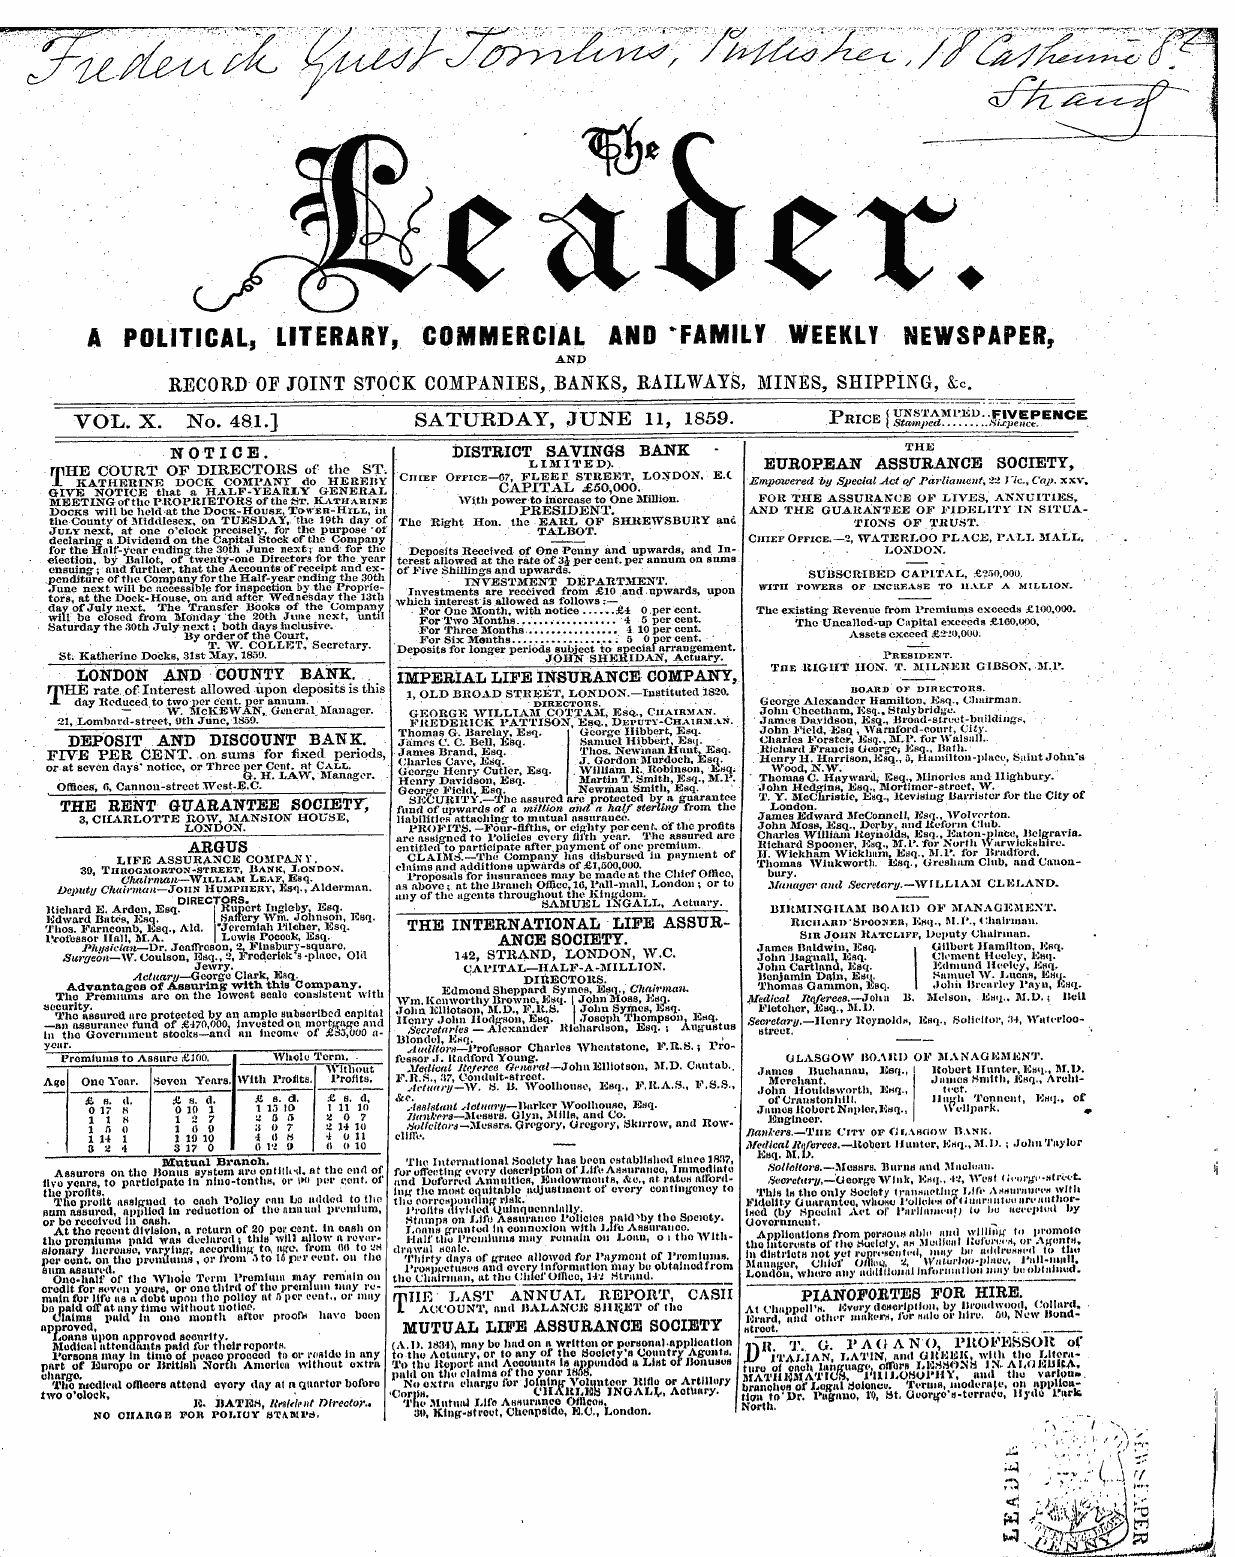 Leader (1850-1860): jS F Y, 2nd edition - Ad00112